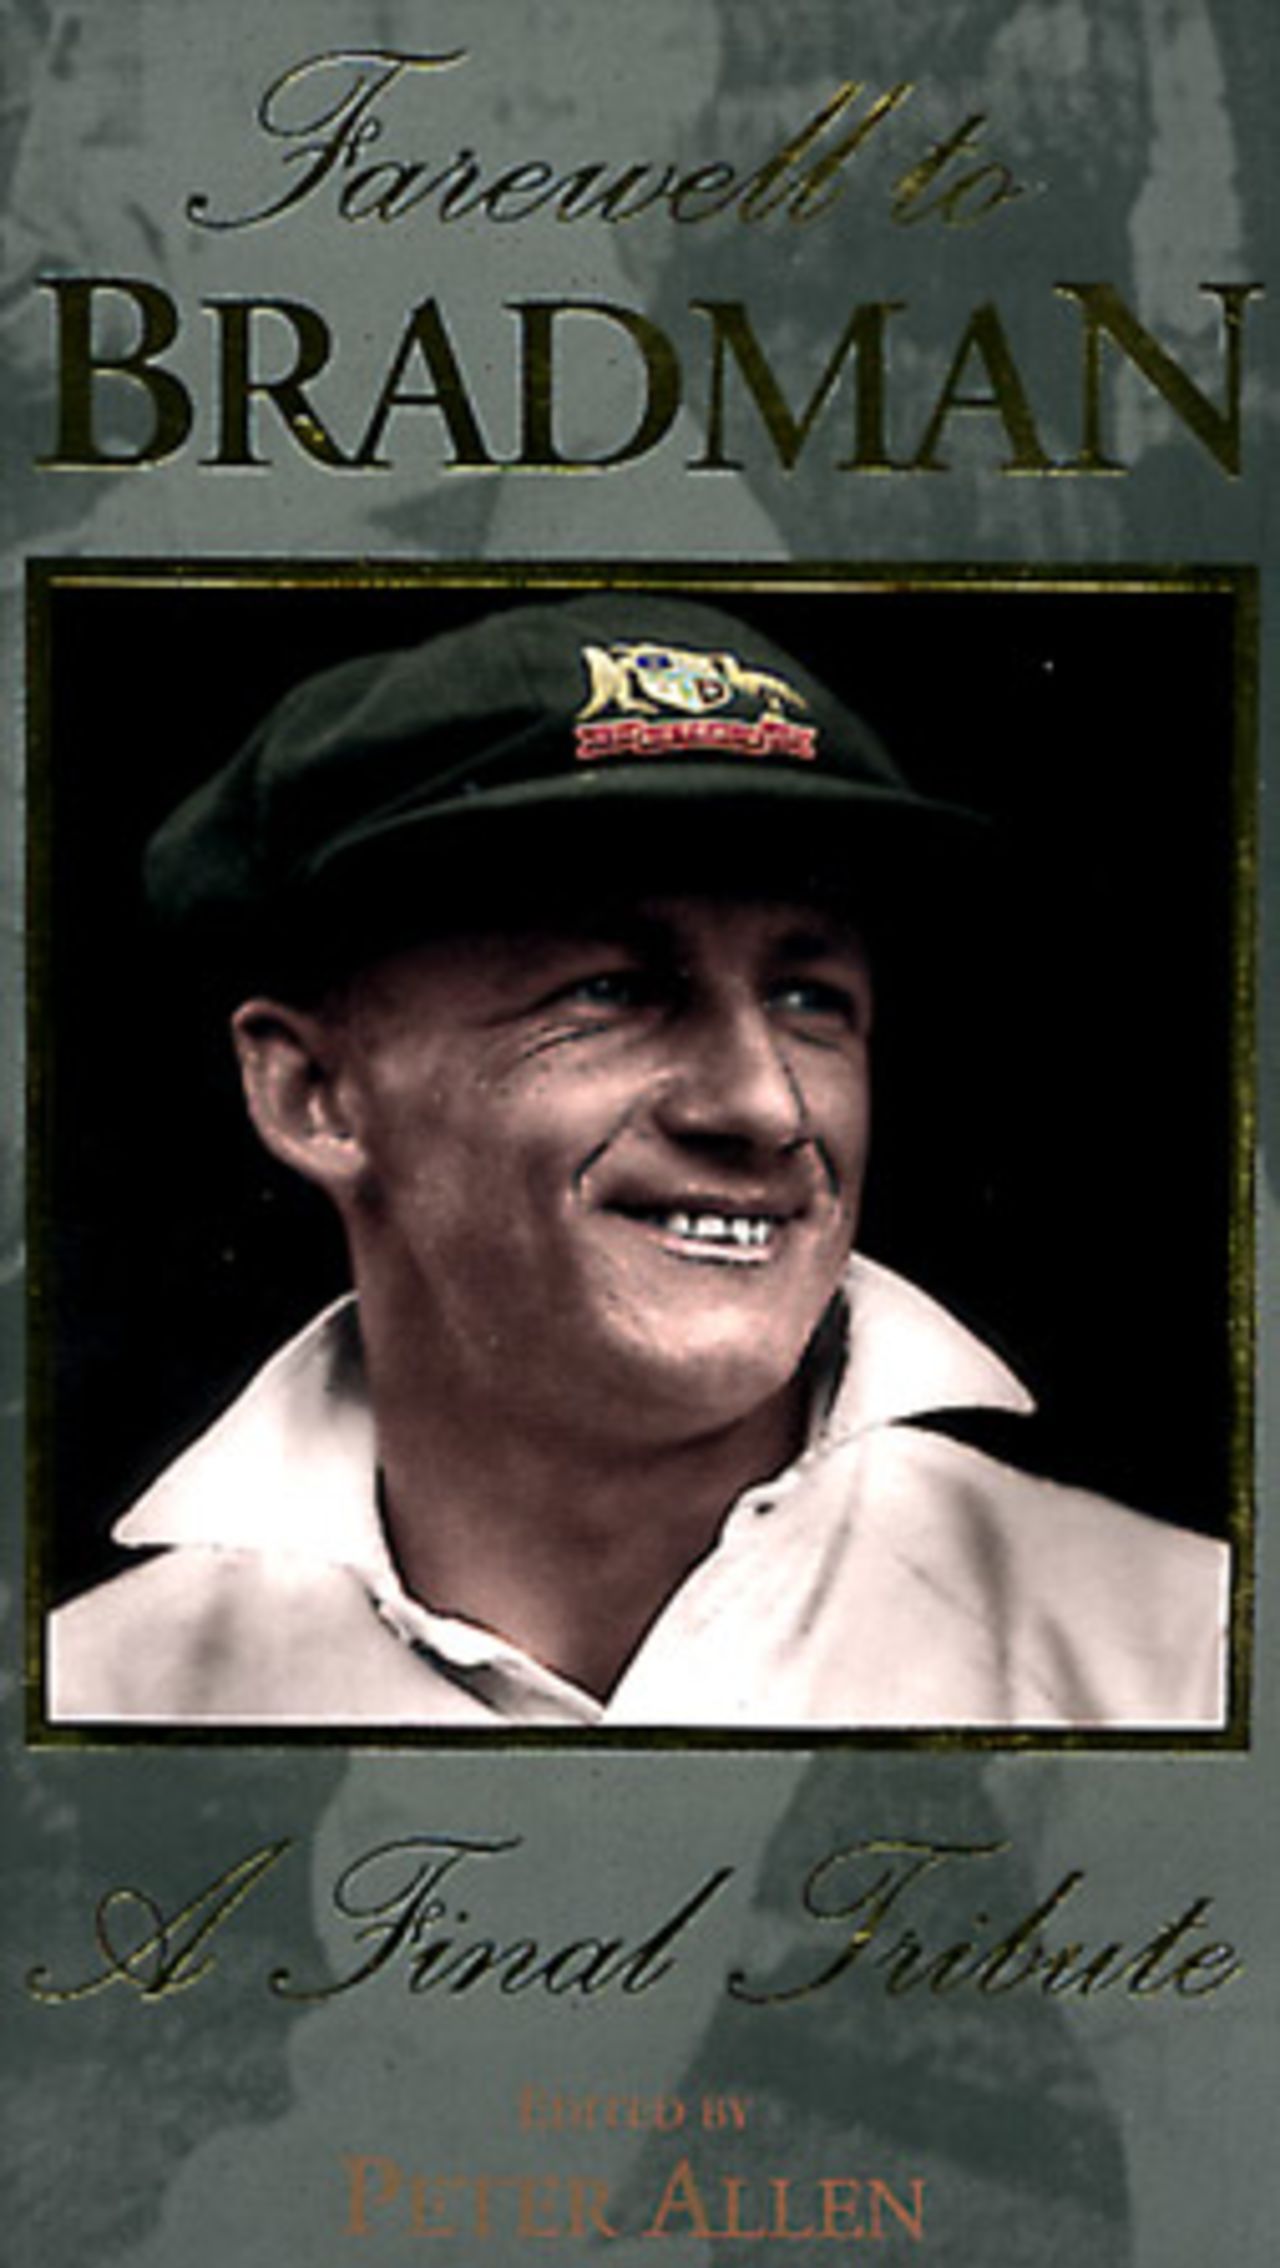 Cover of book 'Farewell to Bradman - A Final Tribute', edited by Peter Allen.